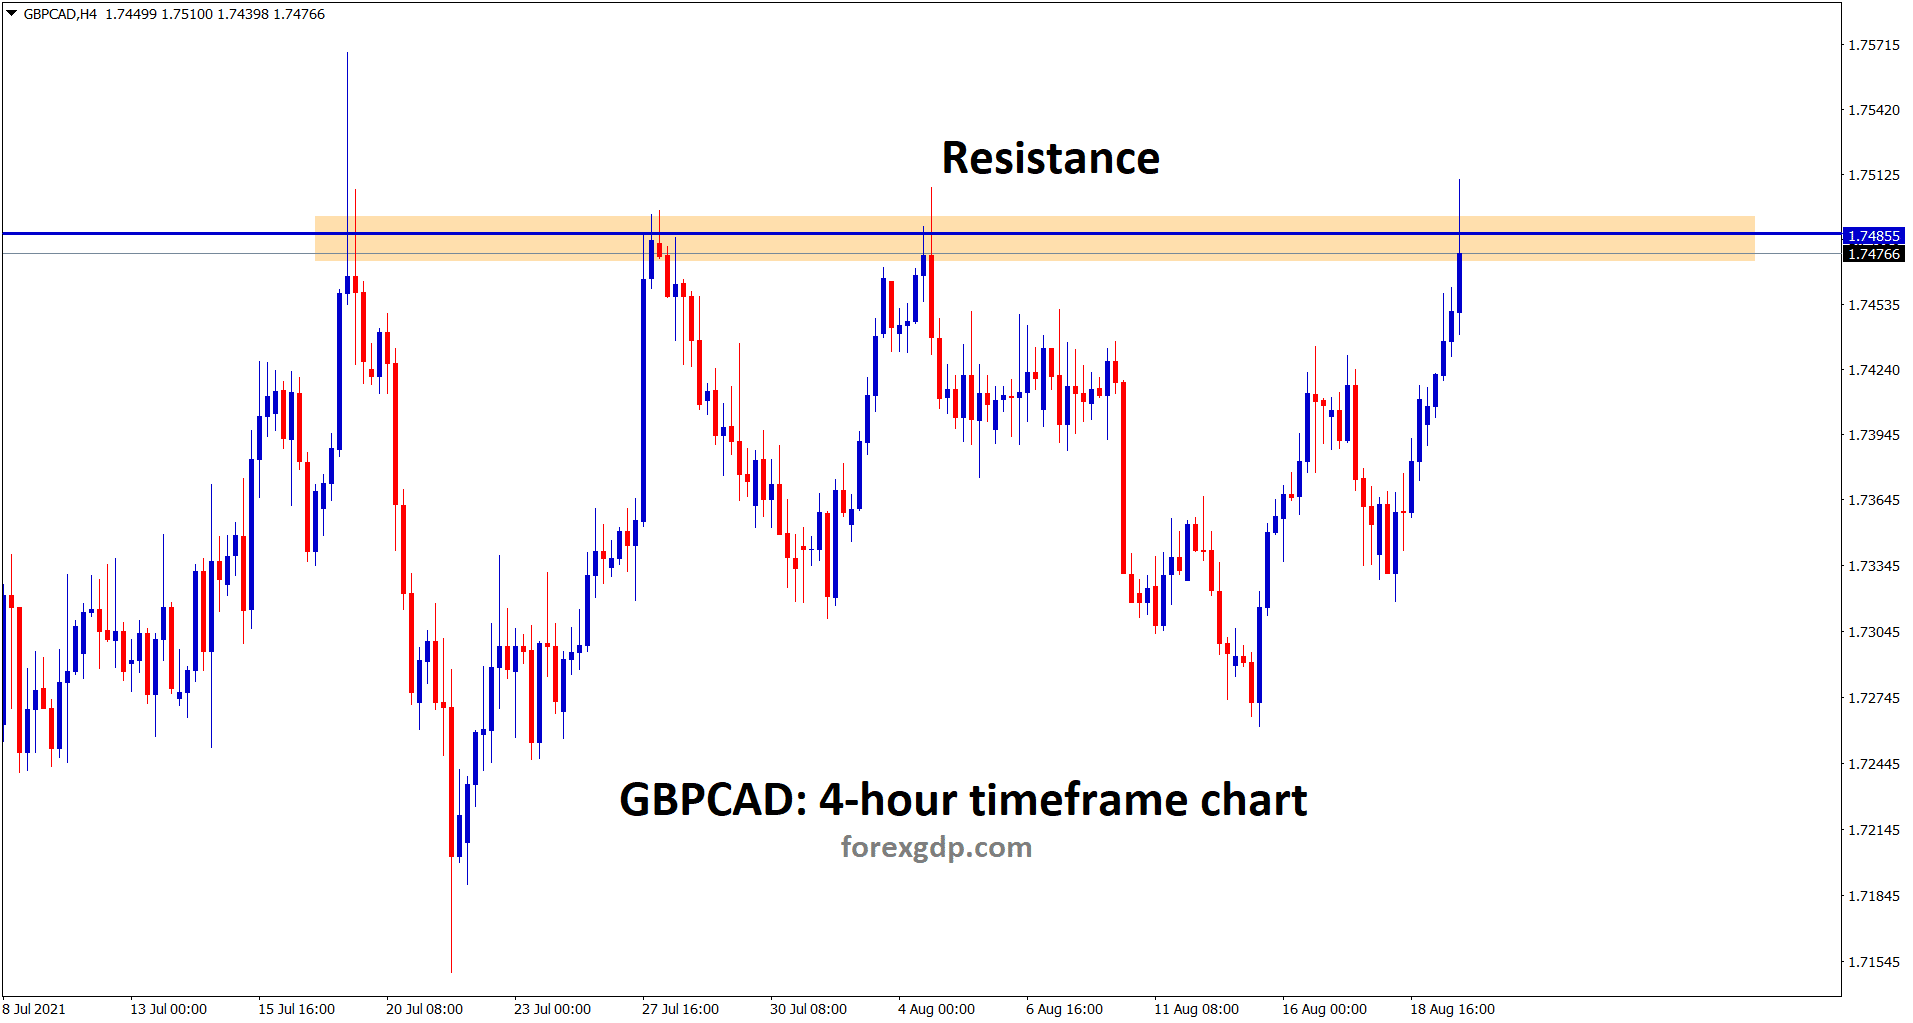 GBPCAD reached the resistance area again for the 4th time wait for breakout or reversal